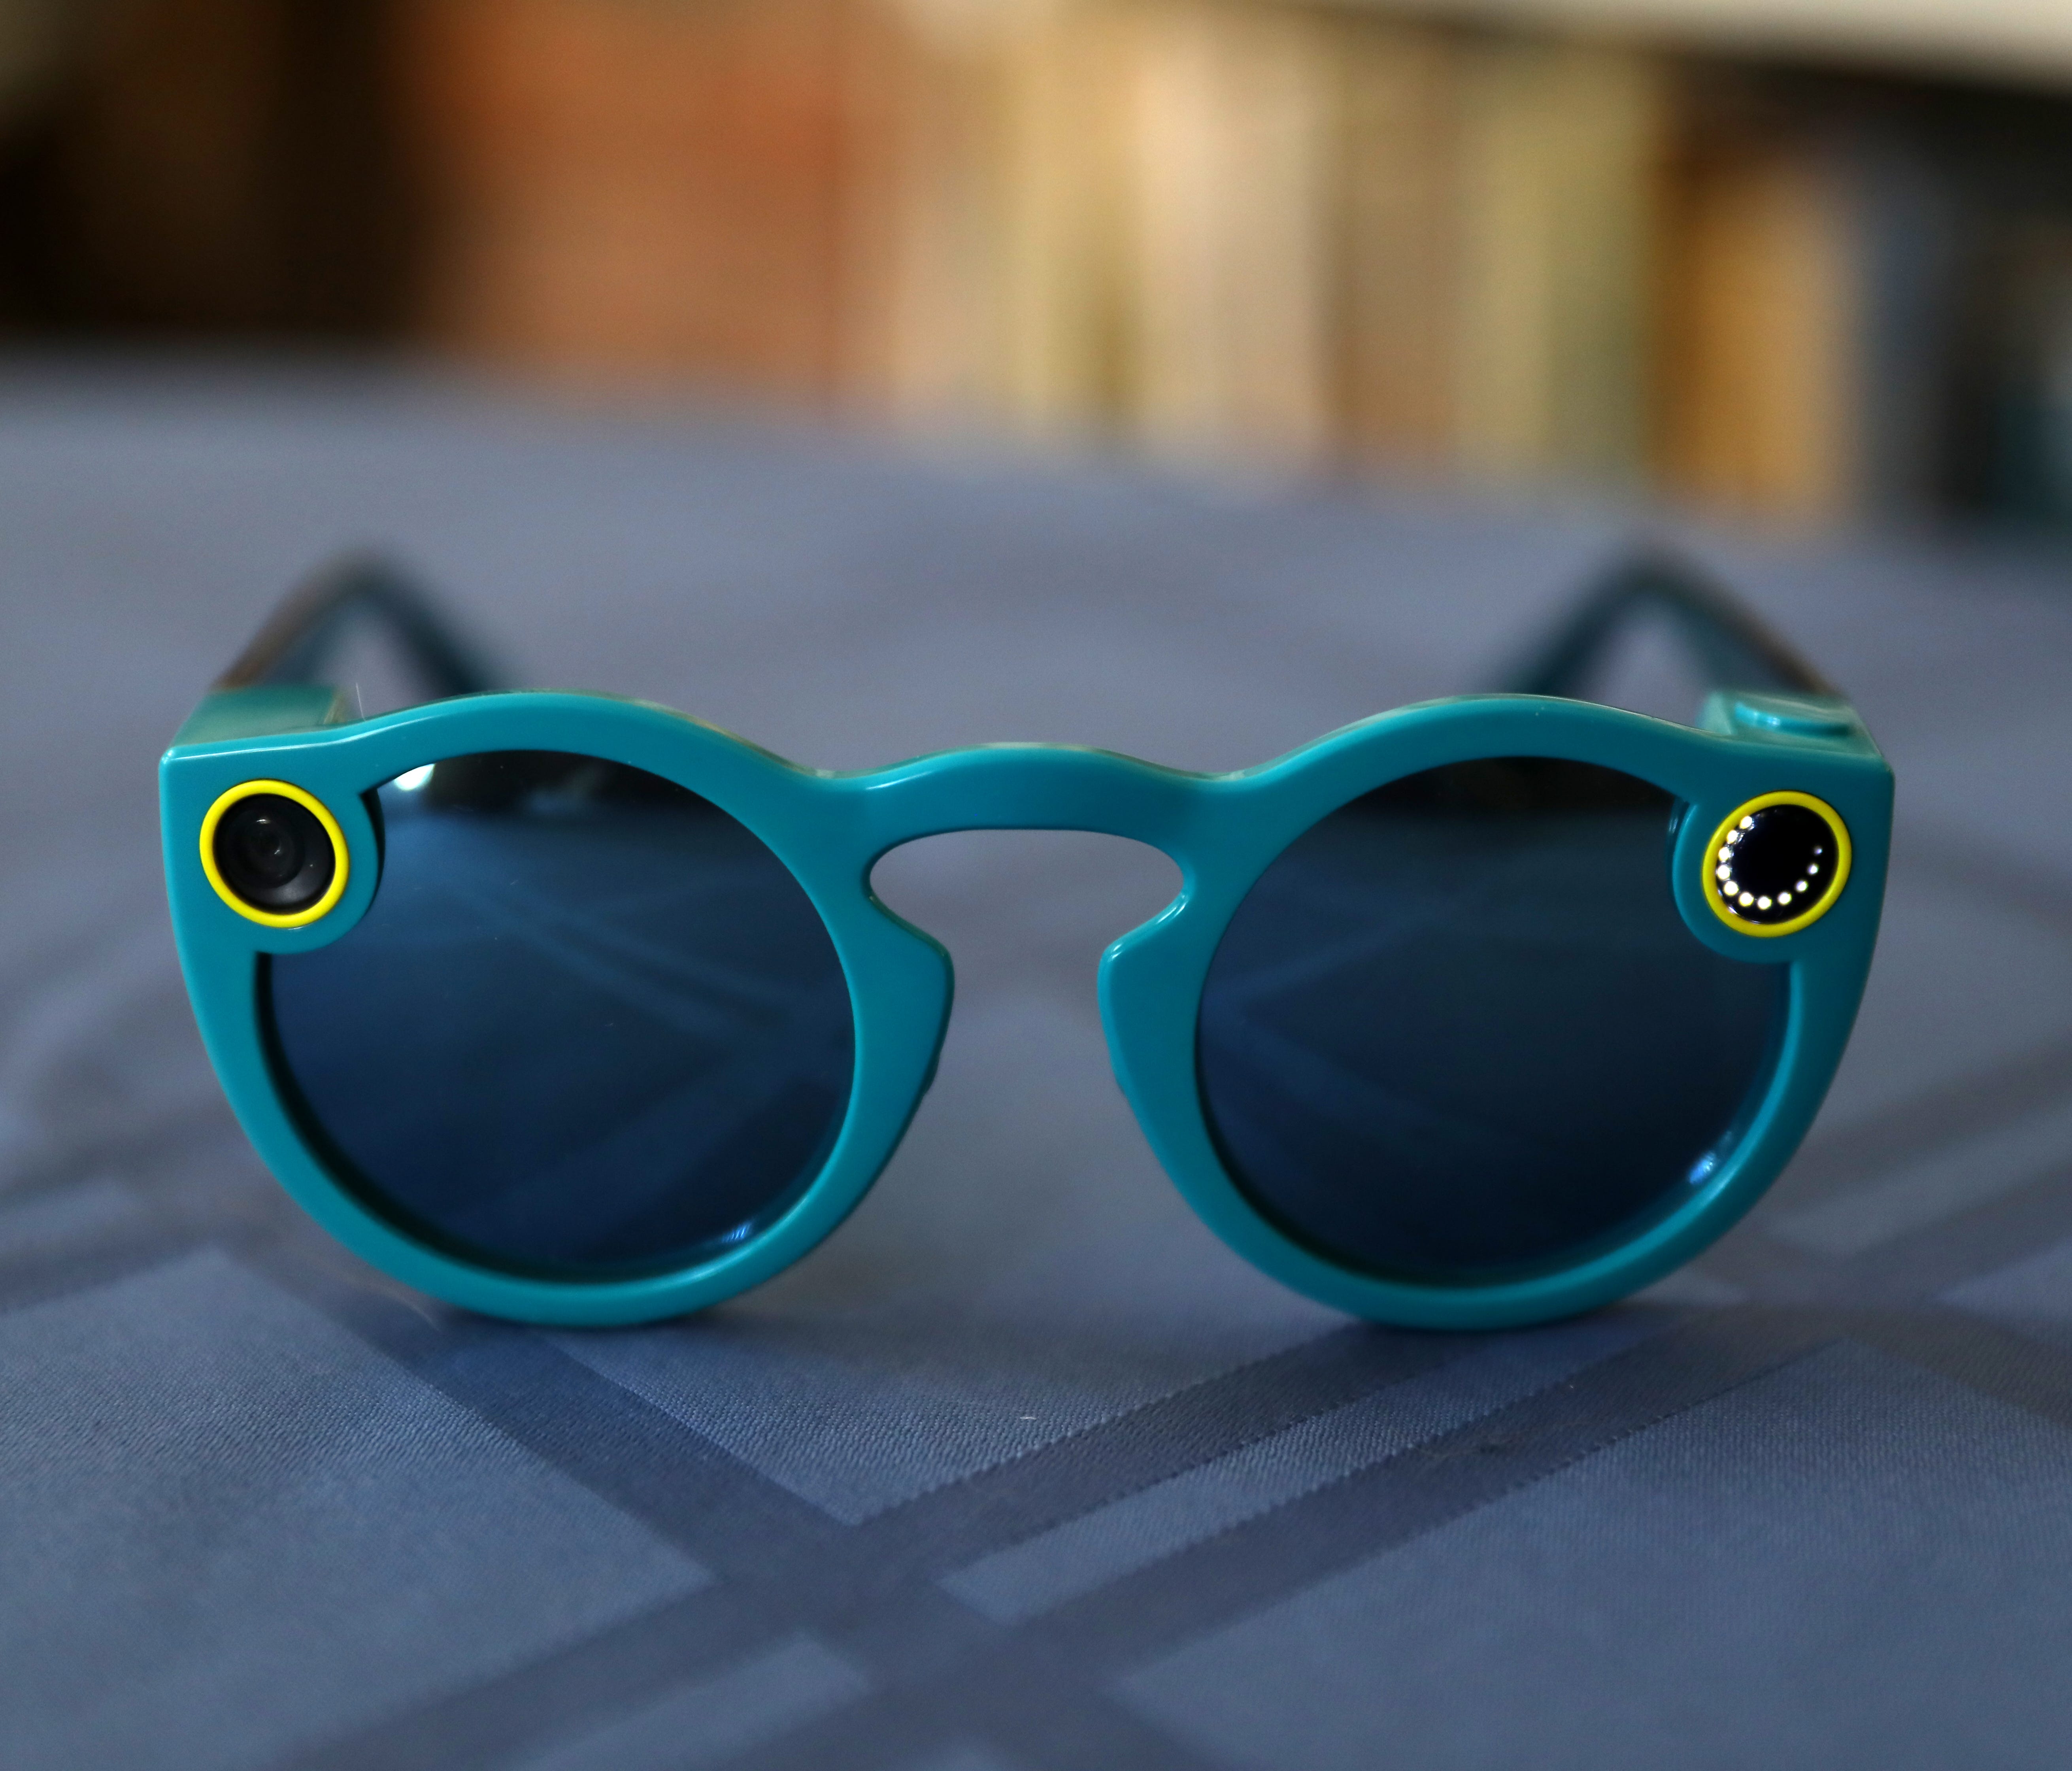 Snapchat's new Spectacles video sunglasses sell for $129